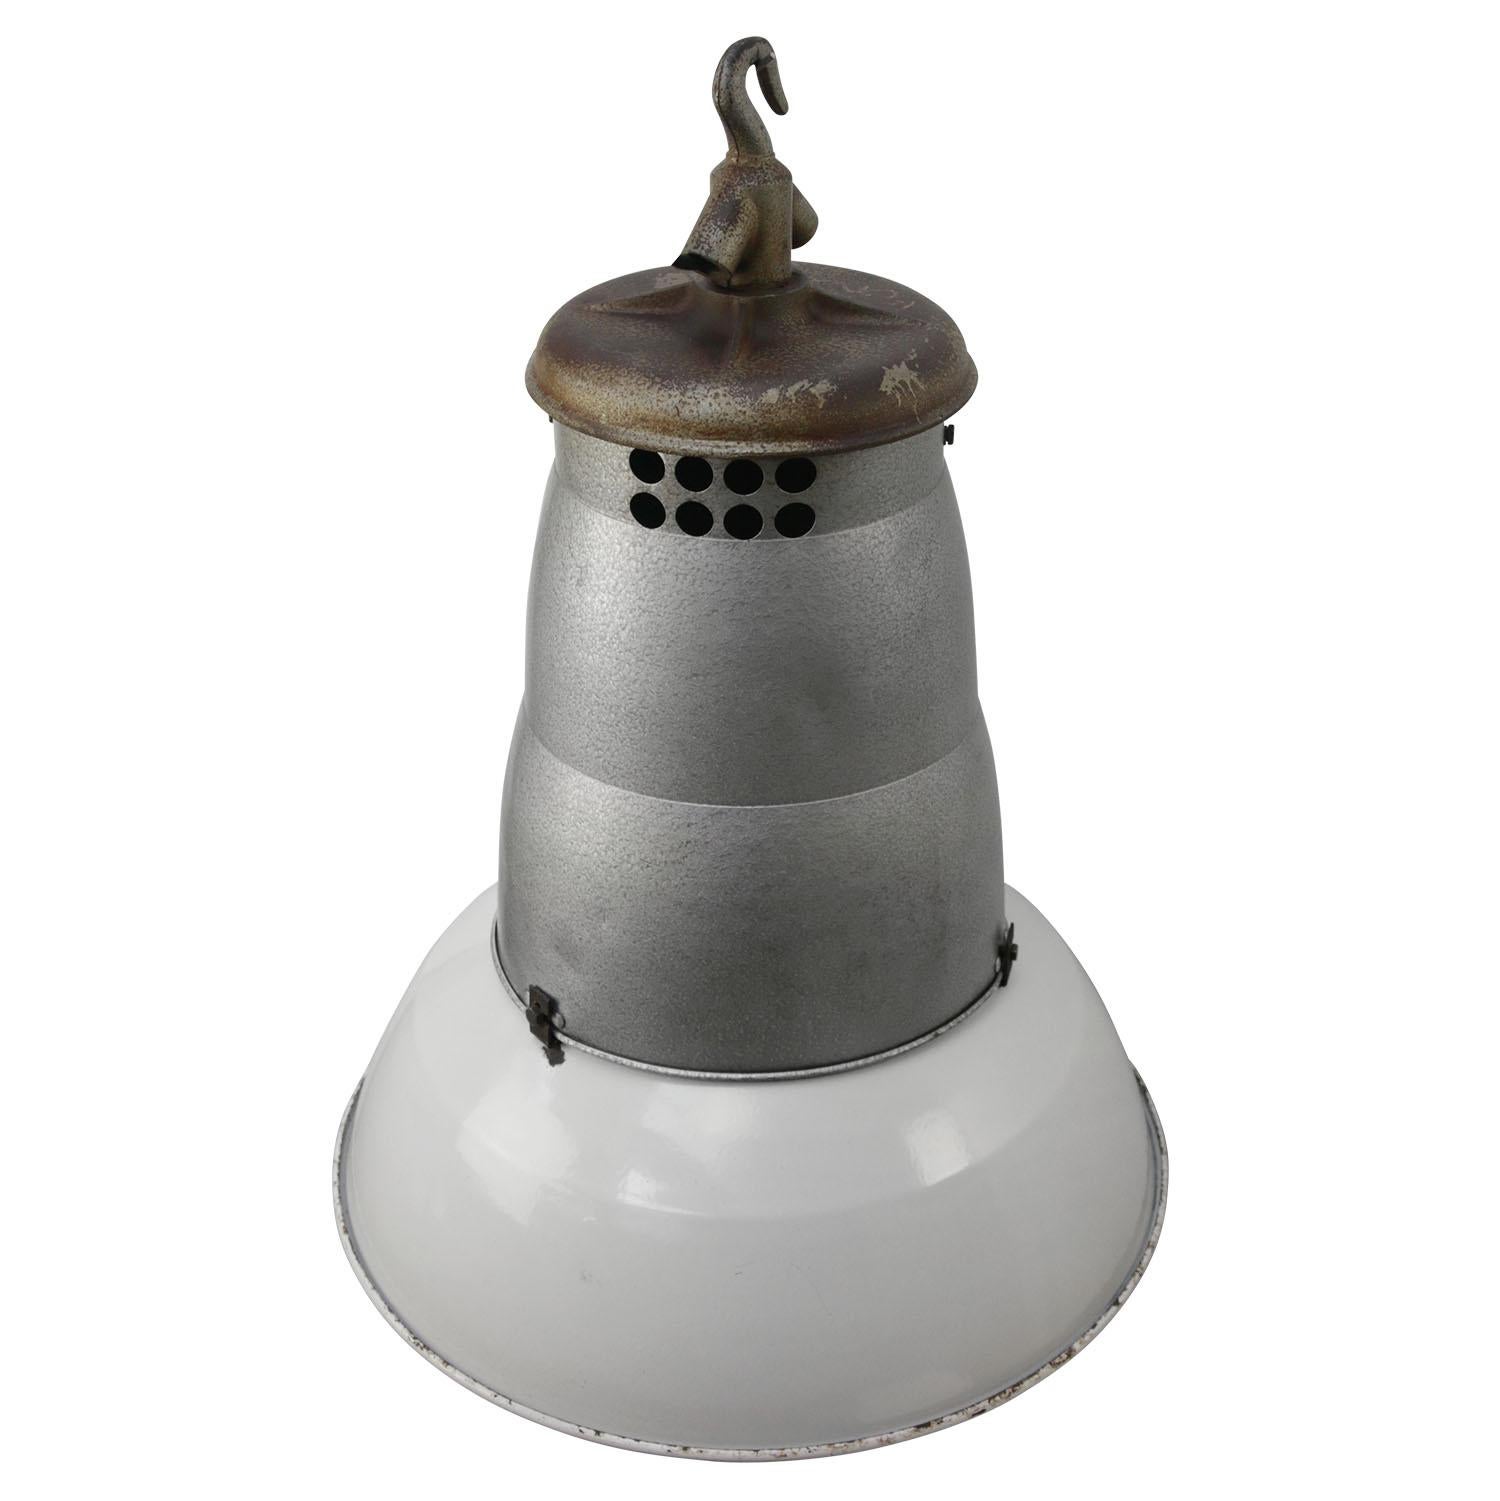 Industrial enamel pendant by Mazda, France
Very light grey enamel shade, metal middle part with cast iron top

Weight: 6.40 kg / 14.1 lb

Priced per individual item. All lamps have been made suitable by international standards for incandescent